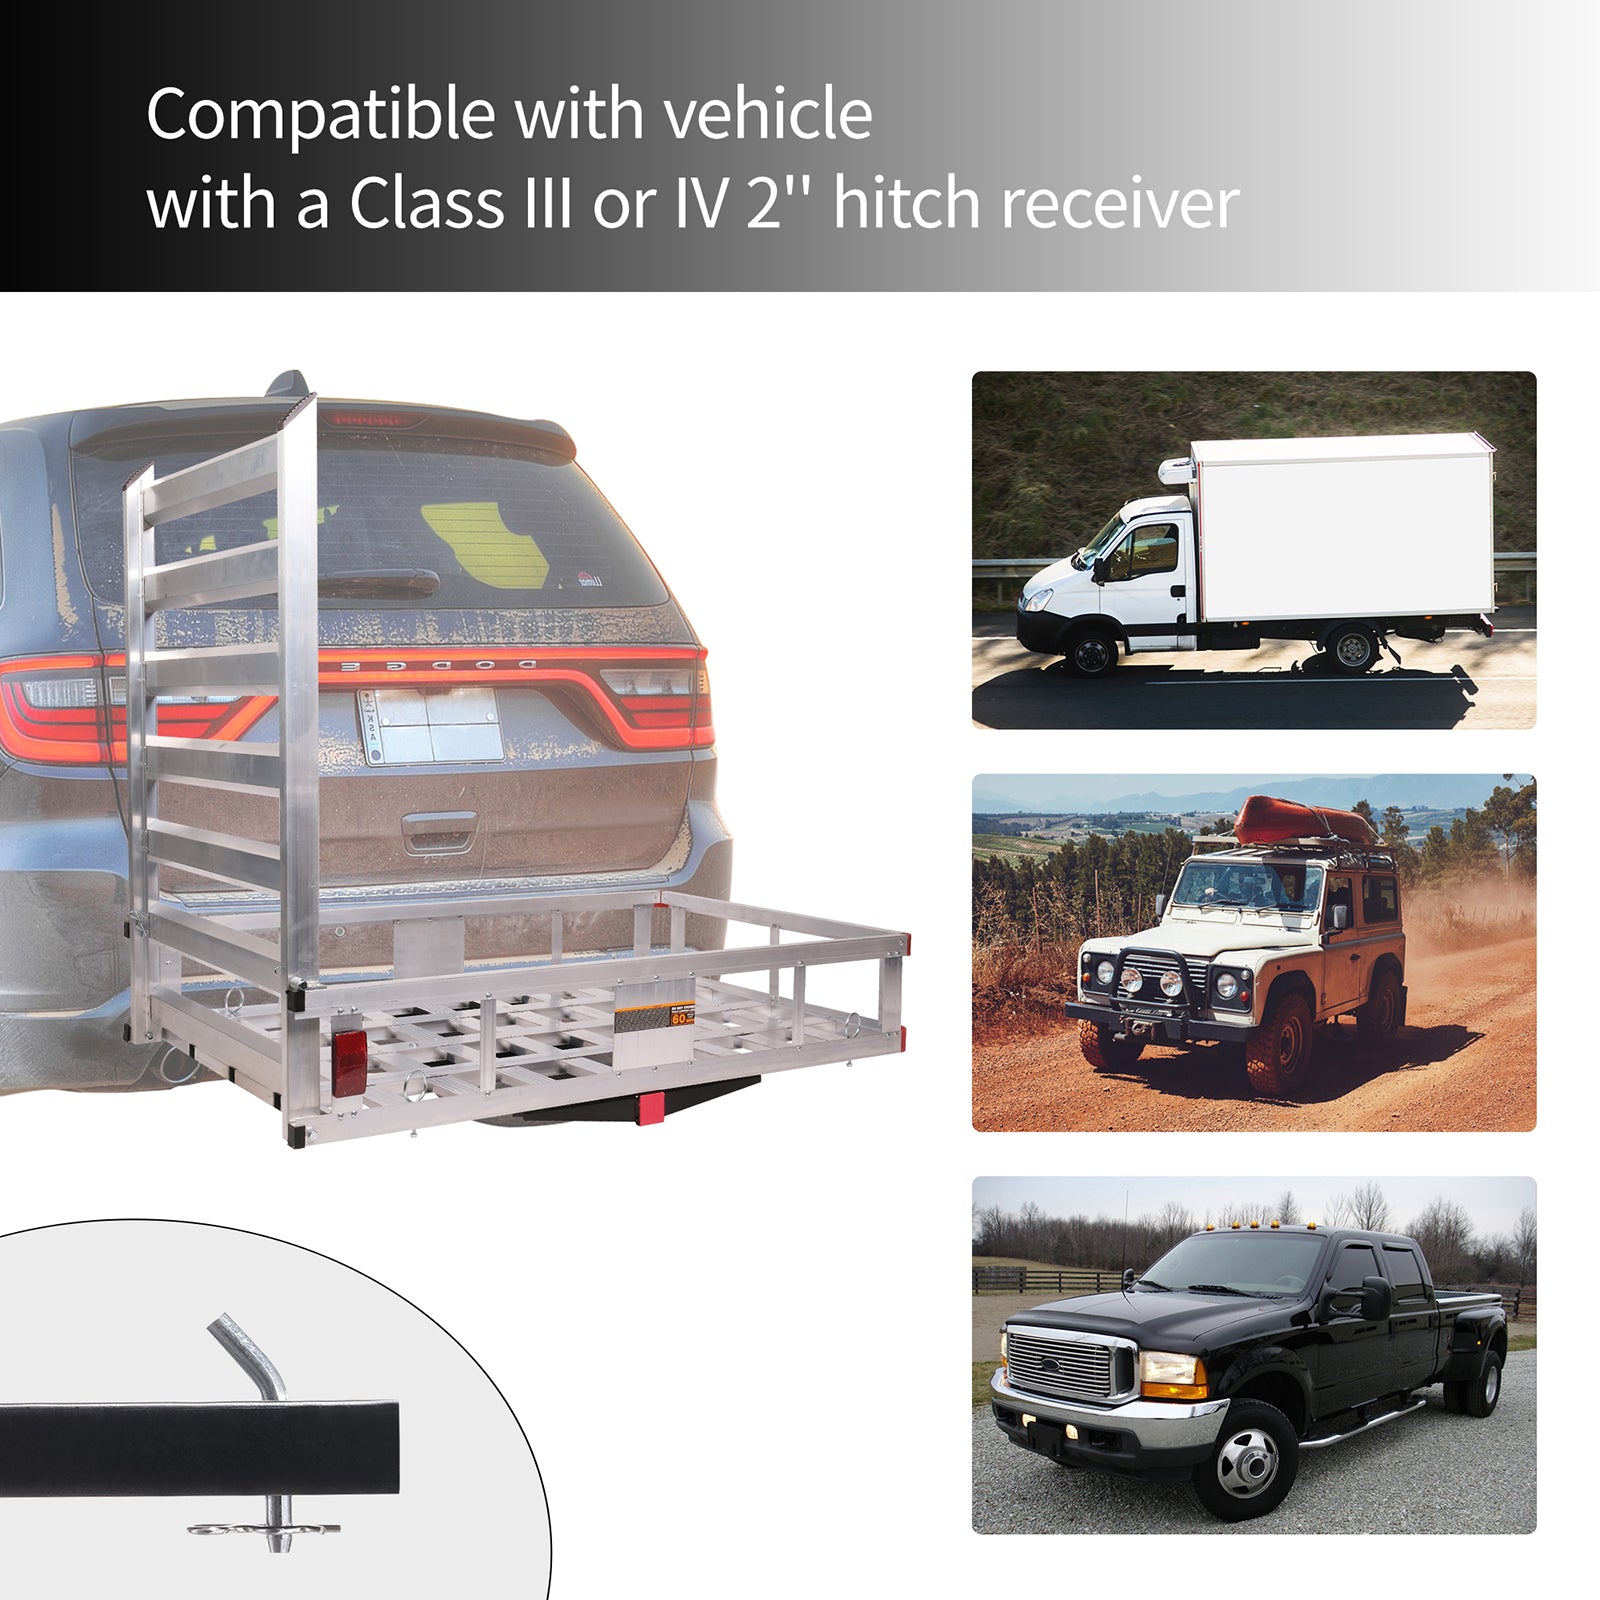 50"x 29.7" Hitch Mount Cargo Carrier Trailer Aluminum Utility Basket with 41.5" Folding Wheelchair Ramp, Silver